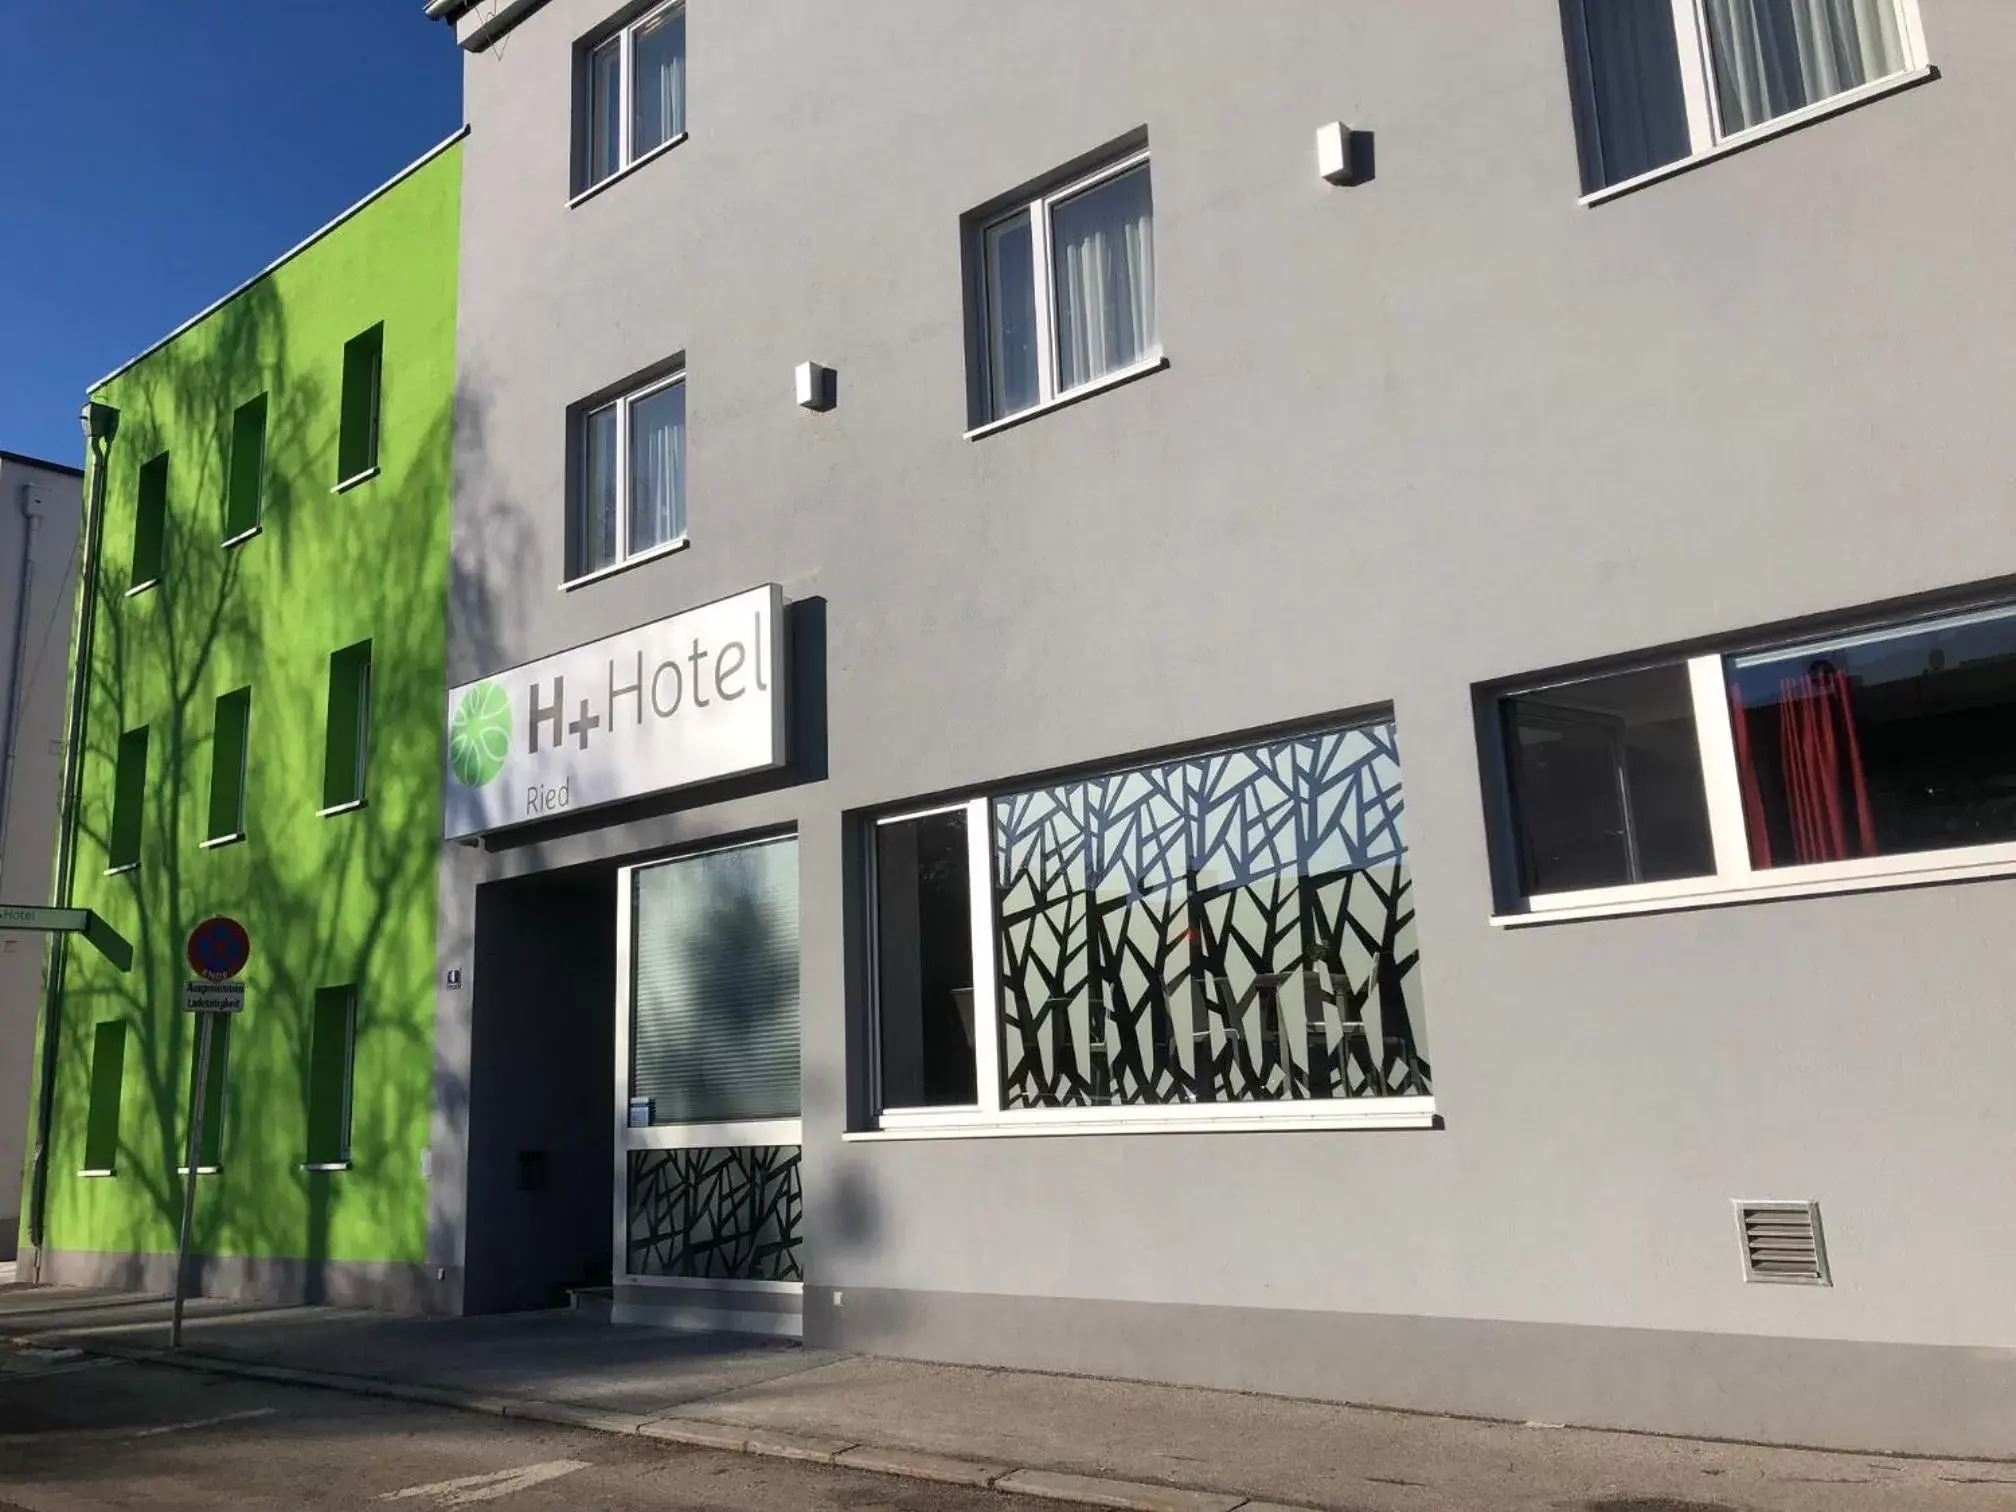 Property building in H+ Hotel Ried